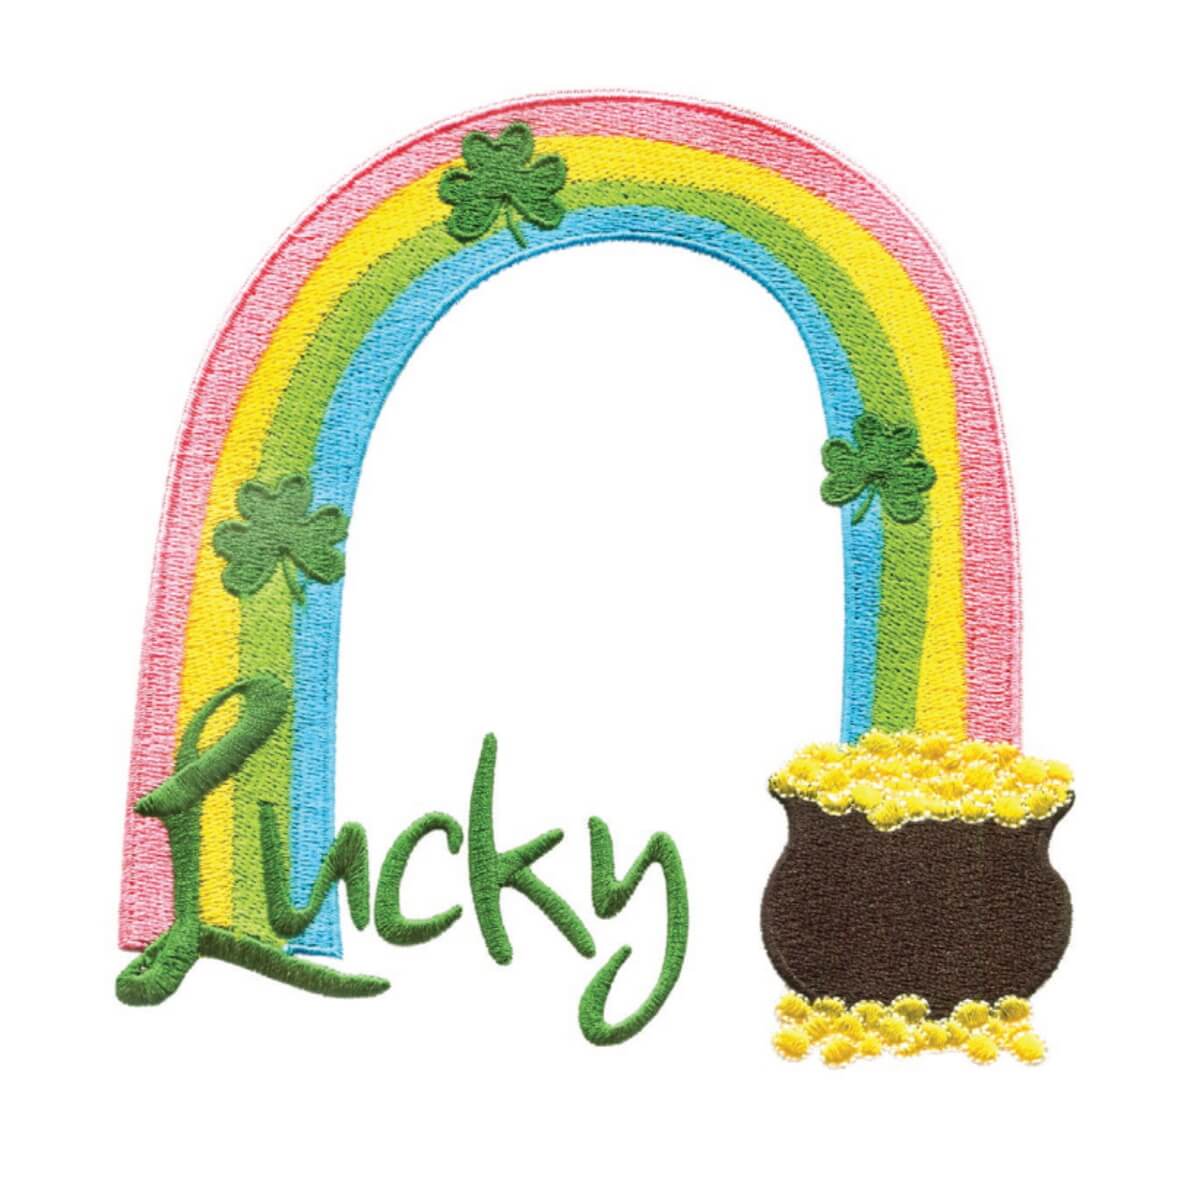 Stickdesign Feeling Lucky: Lucky (Download)